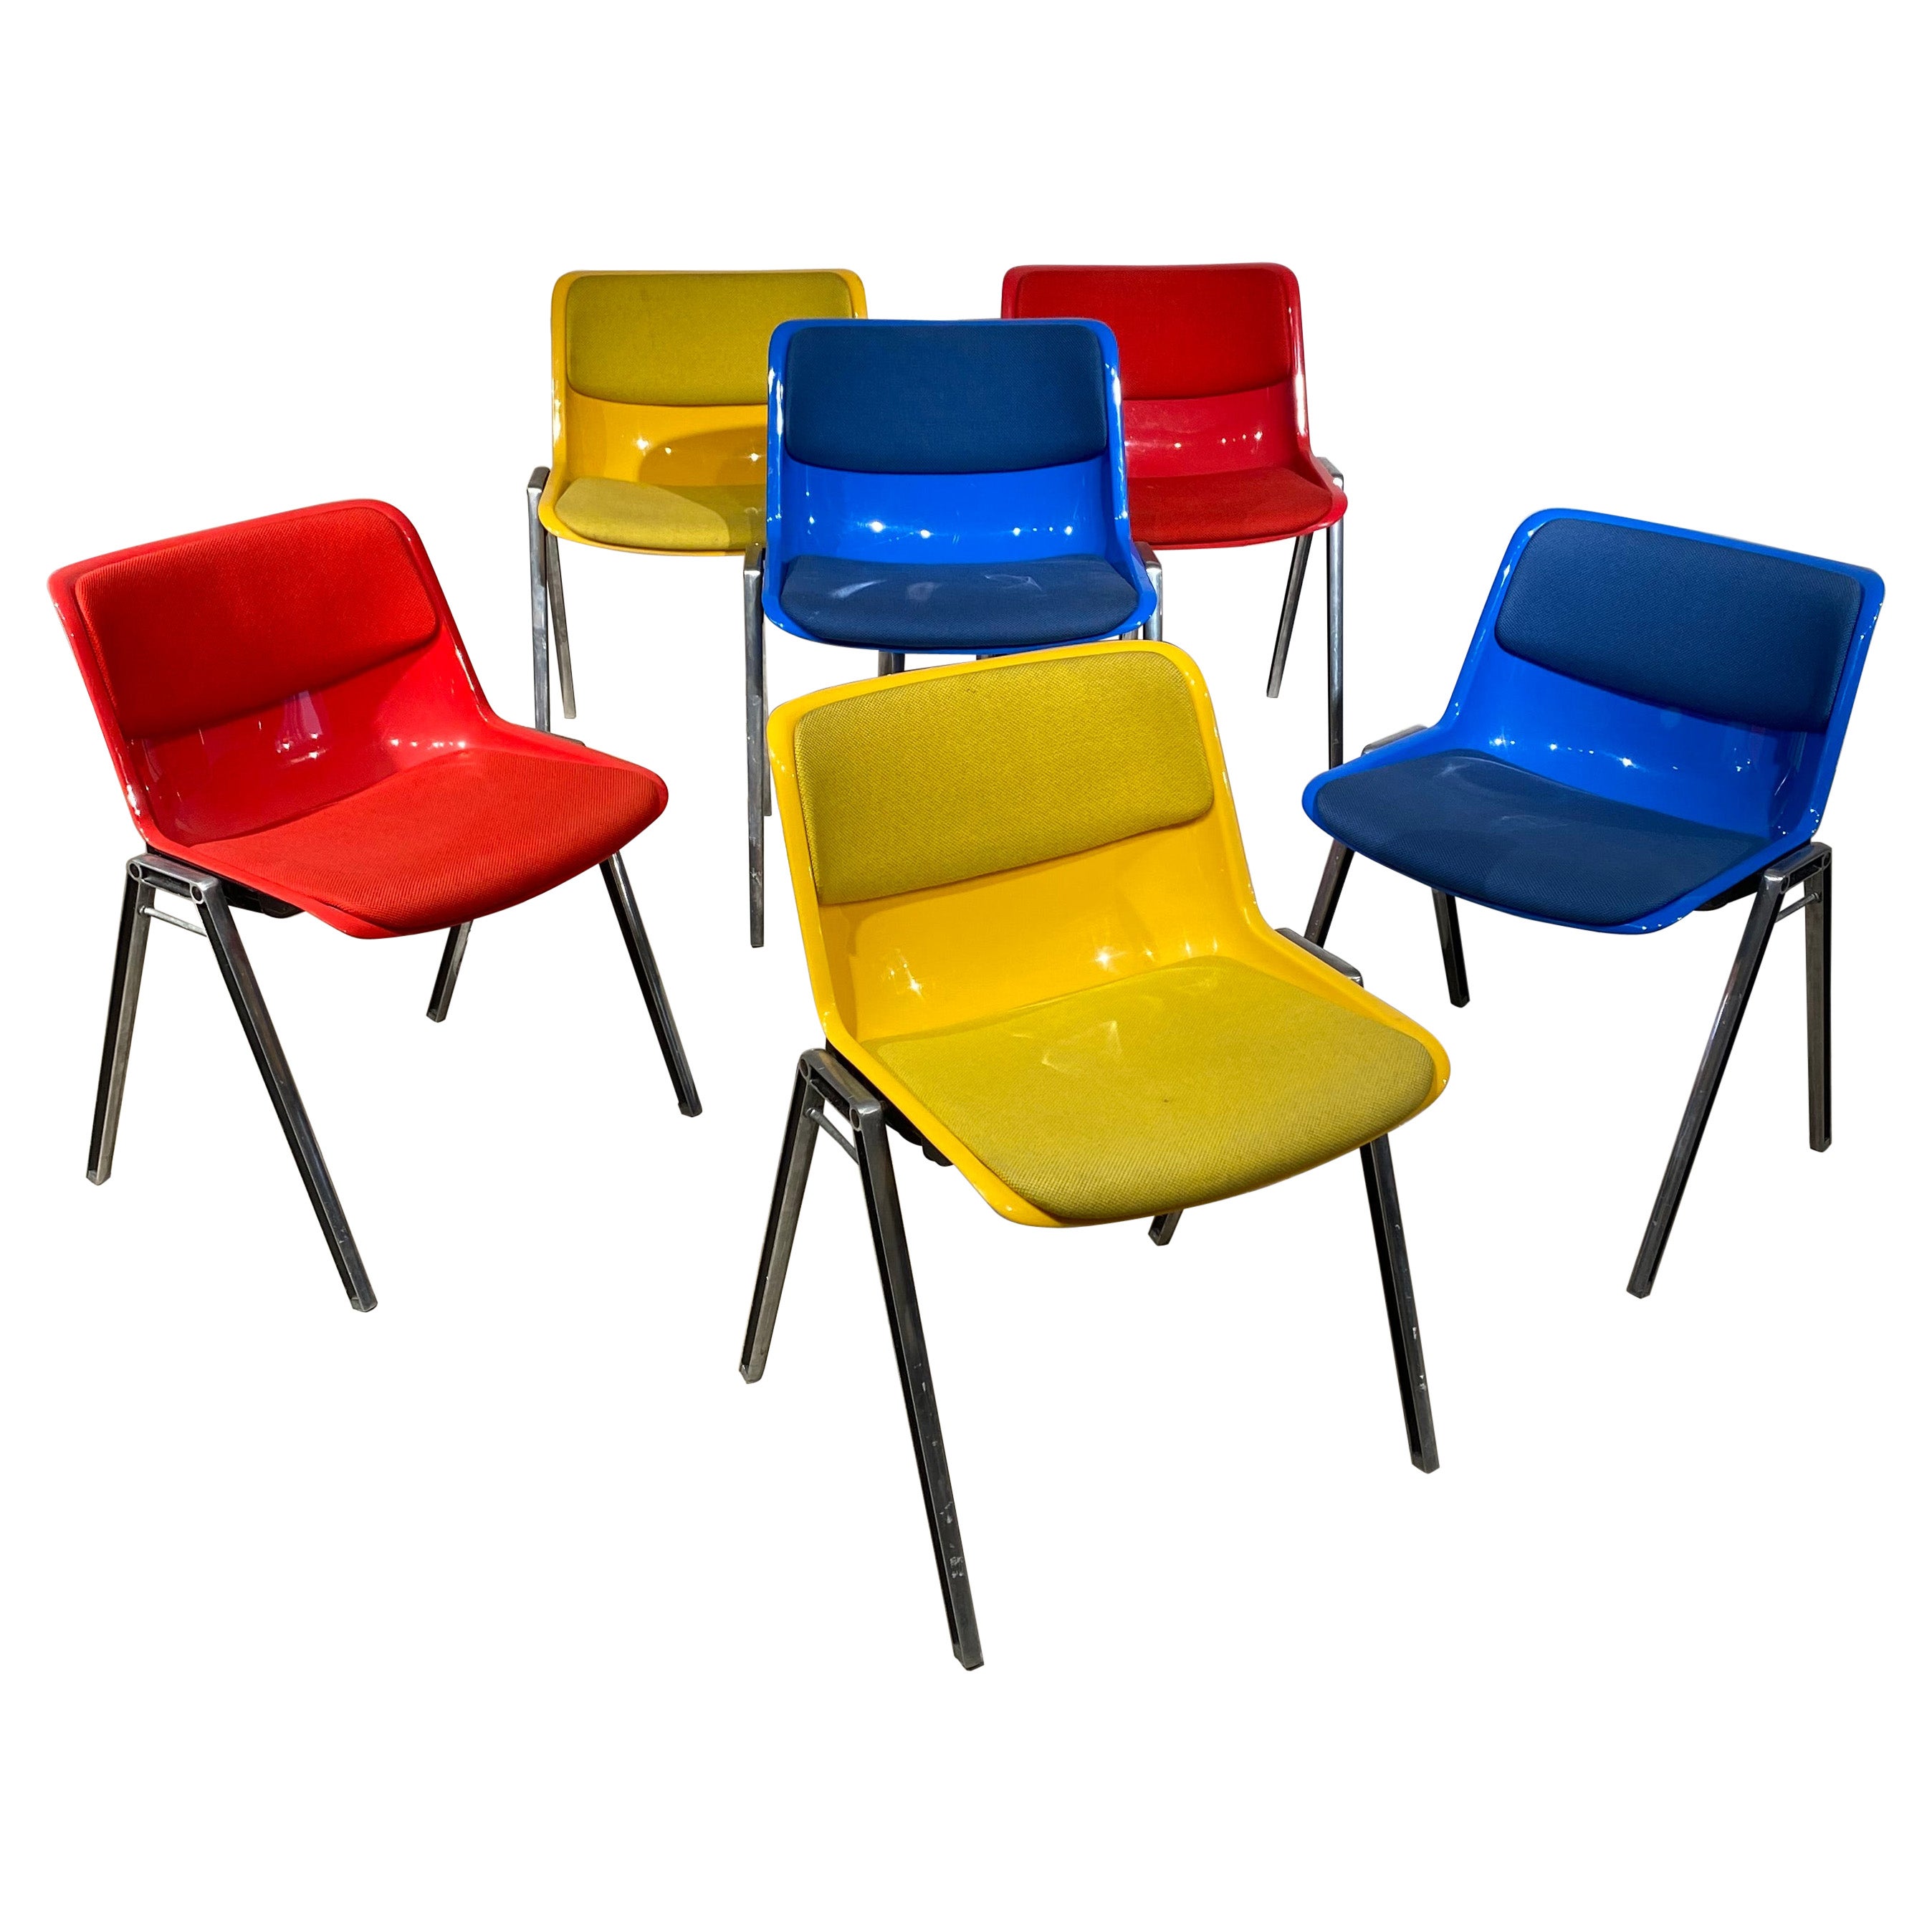 Set of 6 Borsani Dining Chairs Blue, Red & Yellow